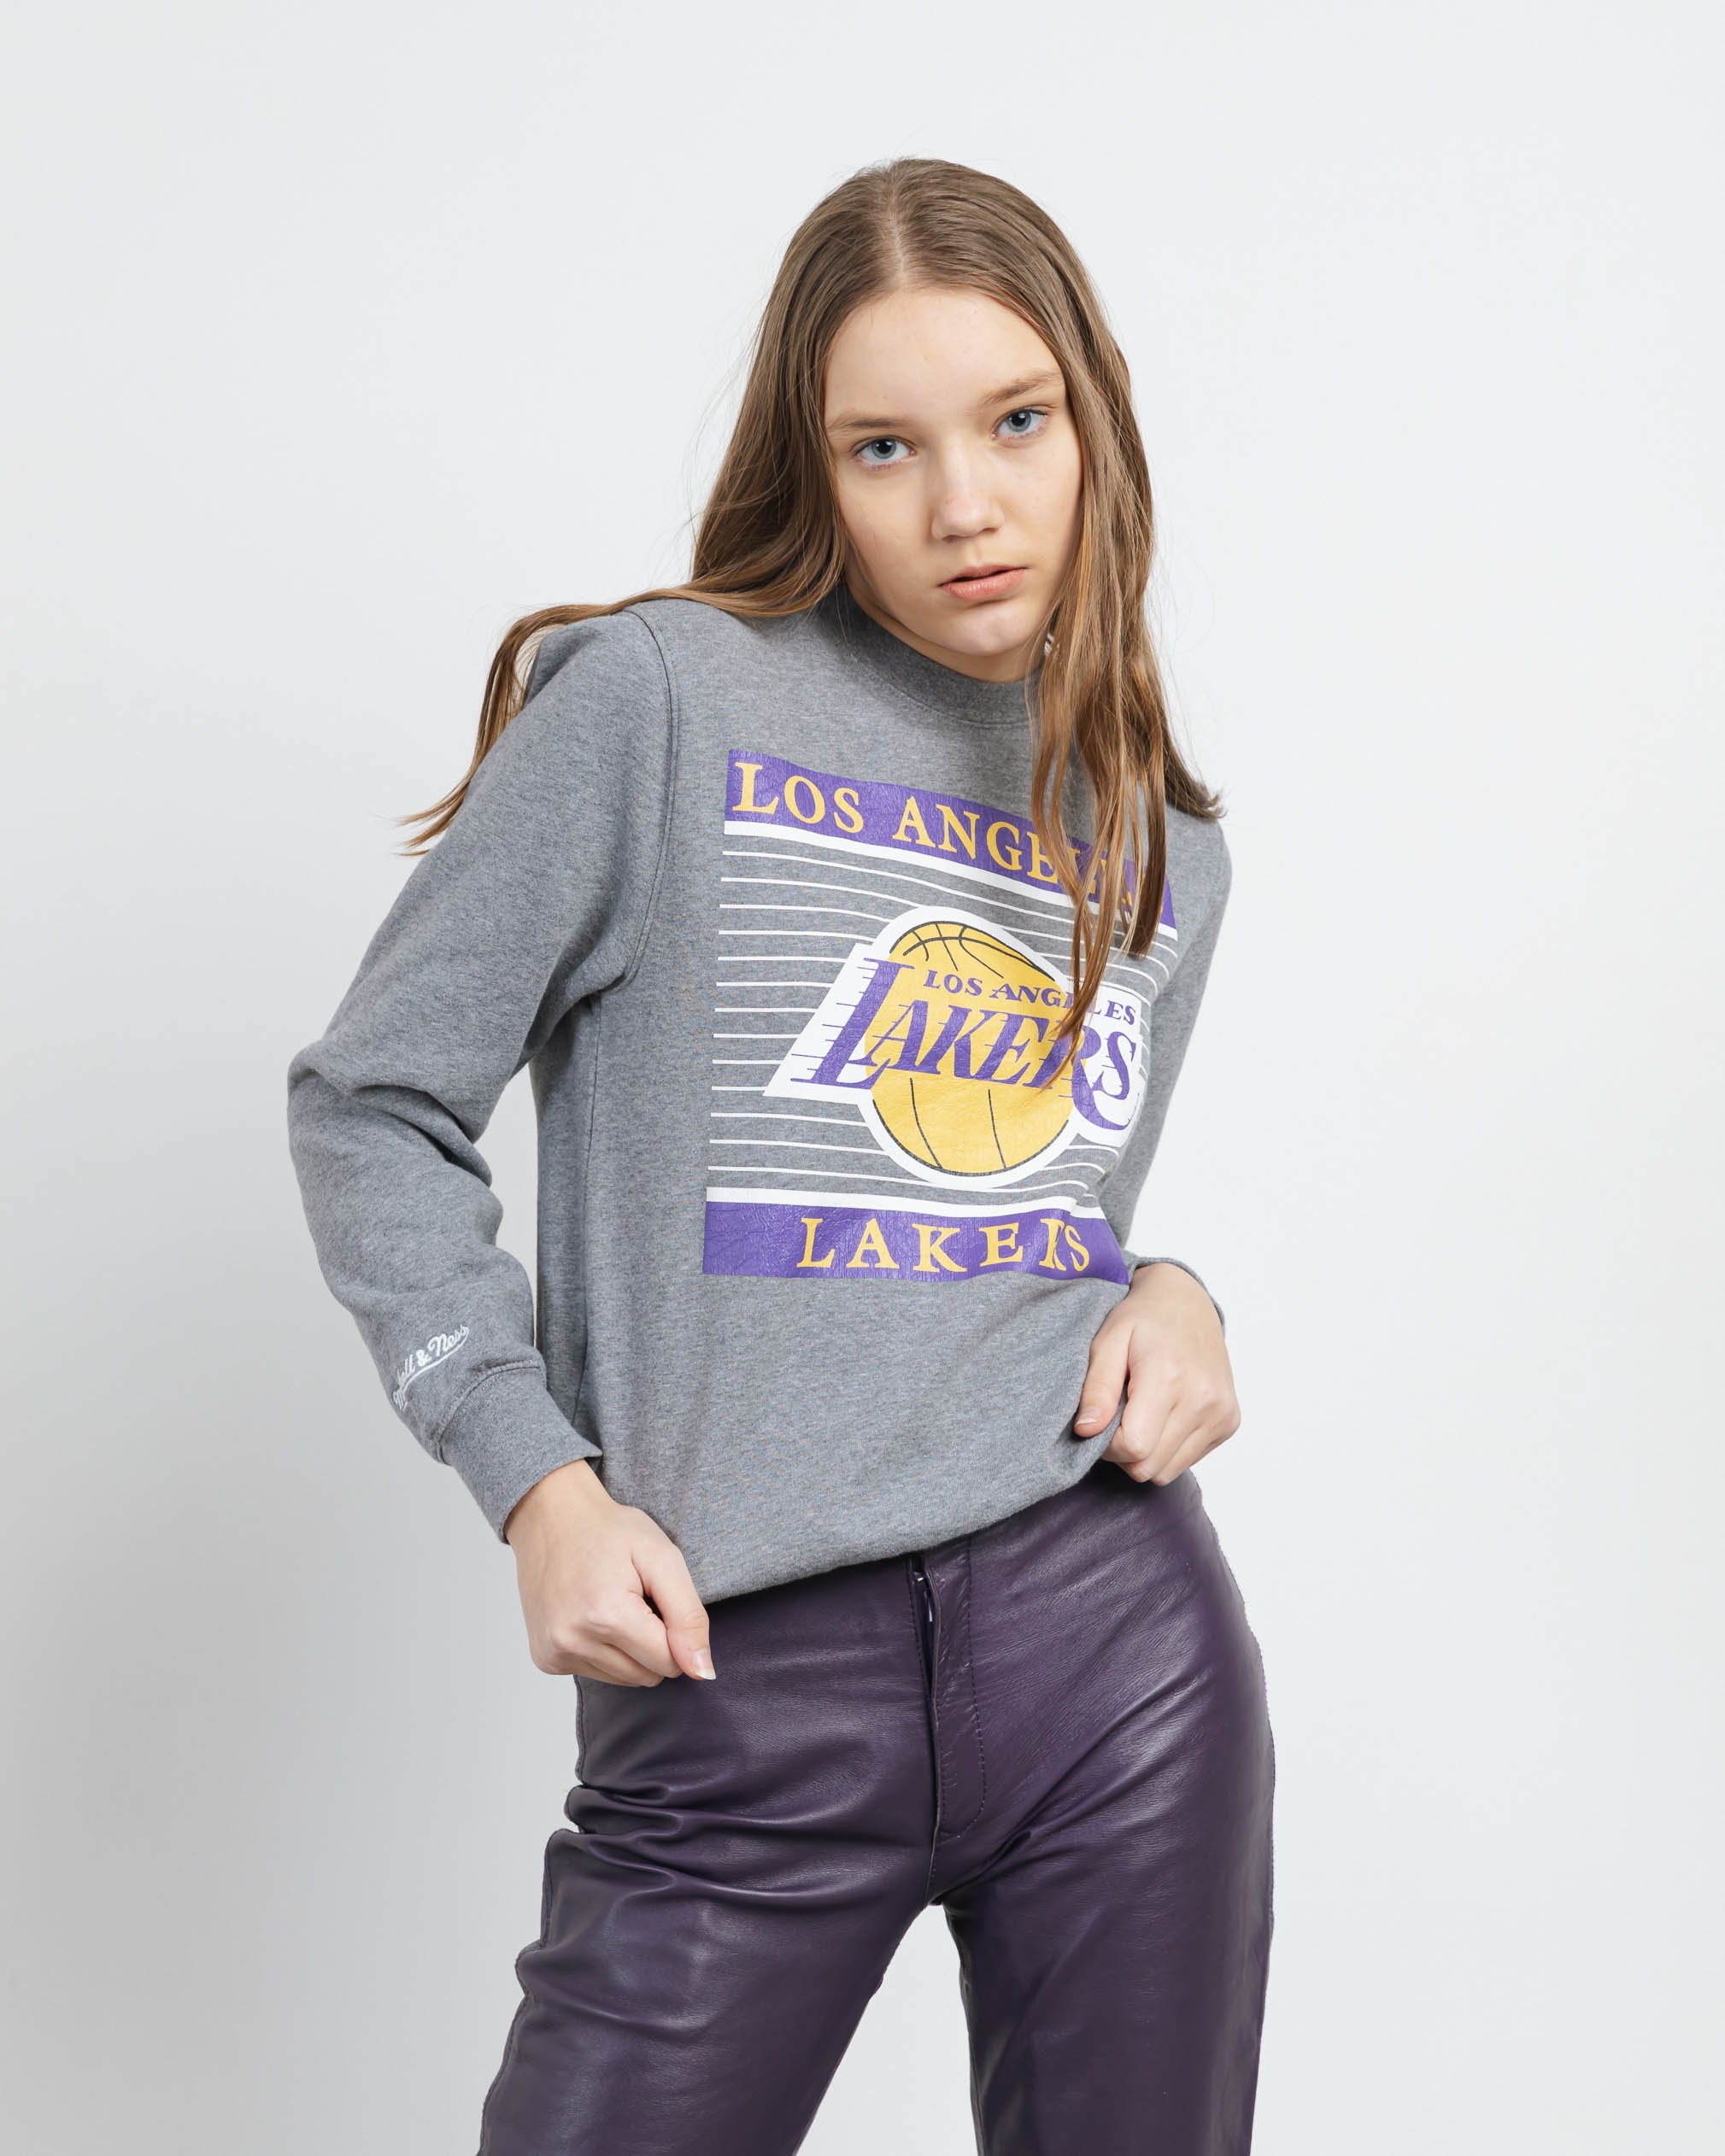 Mitchell and Ness Women's Los Angeles Lakers Logo Crewneck